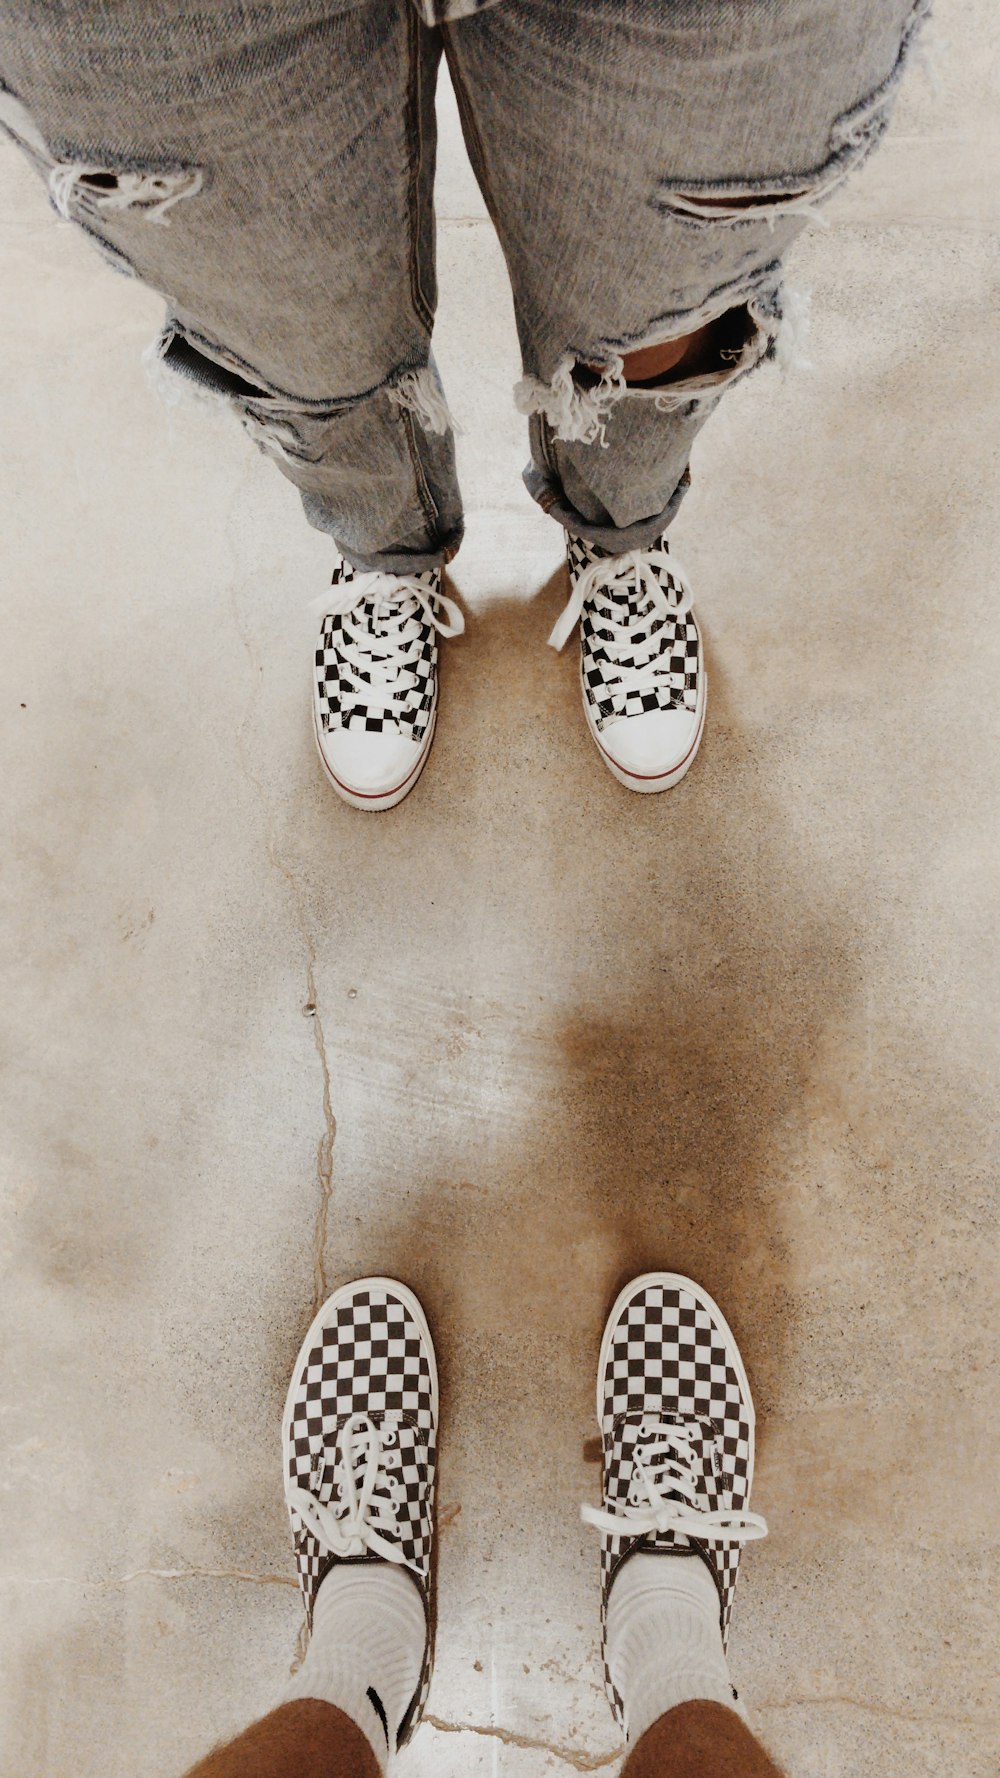 person wearing white and black polka dot sneakers